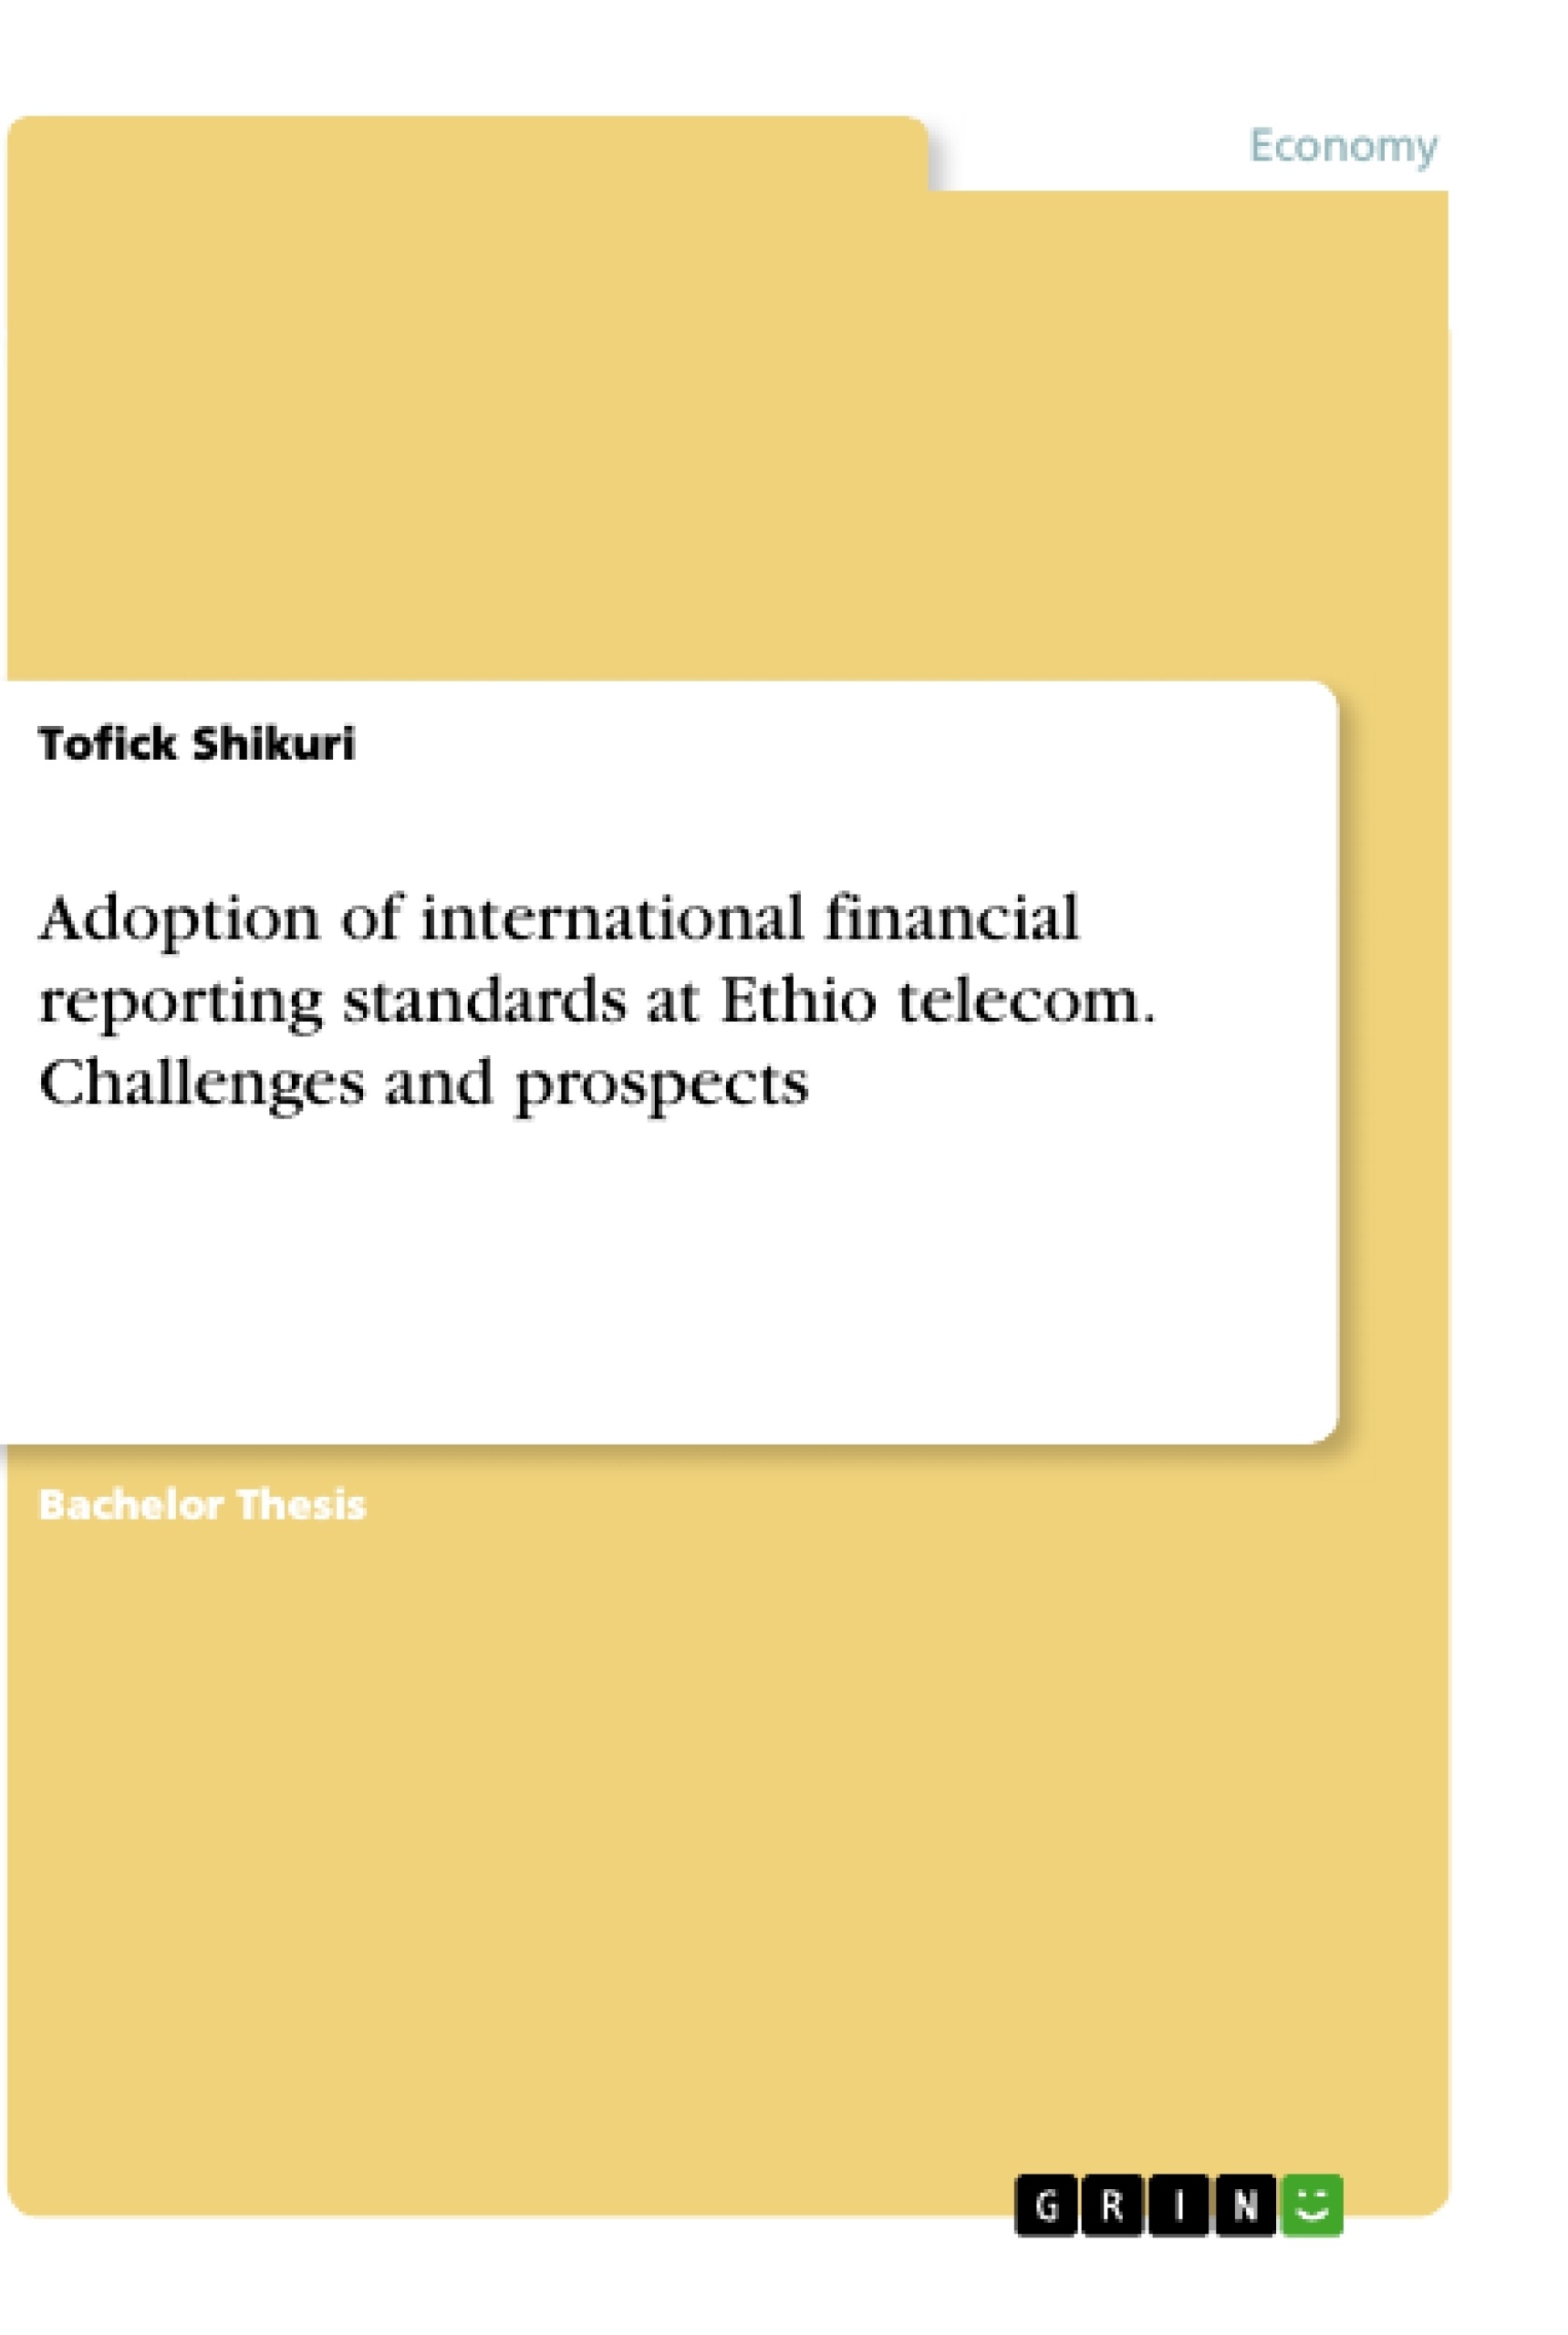 and　reporting　Challenges　of　telecom.　financial　Ethio　at　standards　international　Adoption　prospects